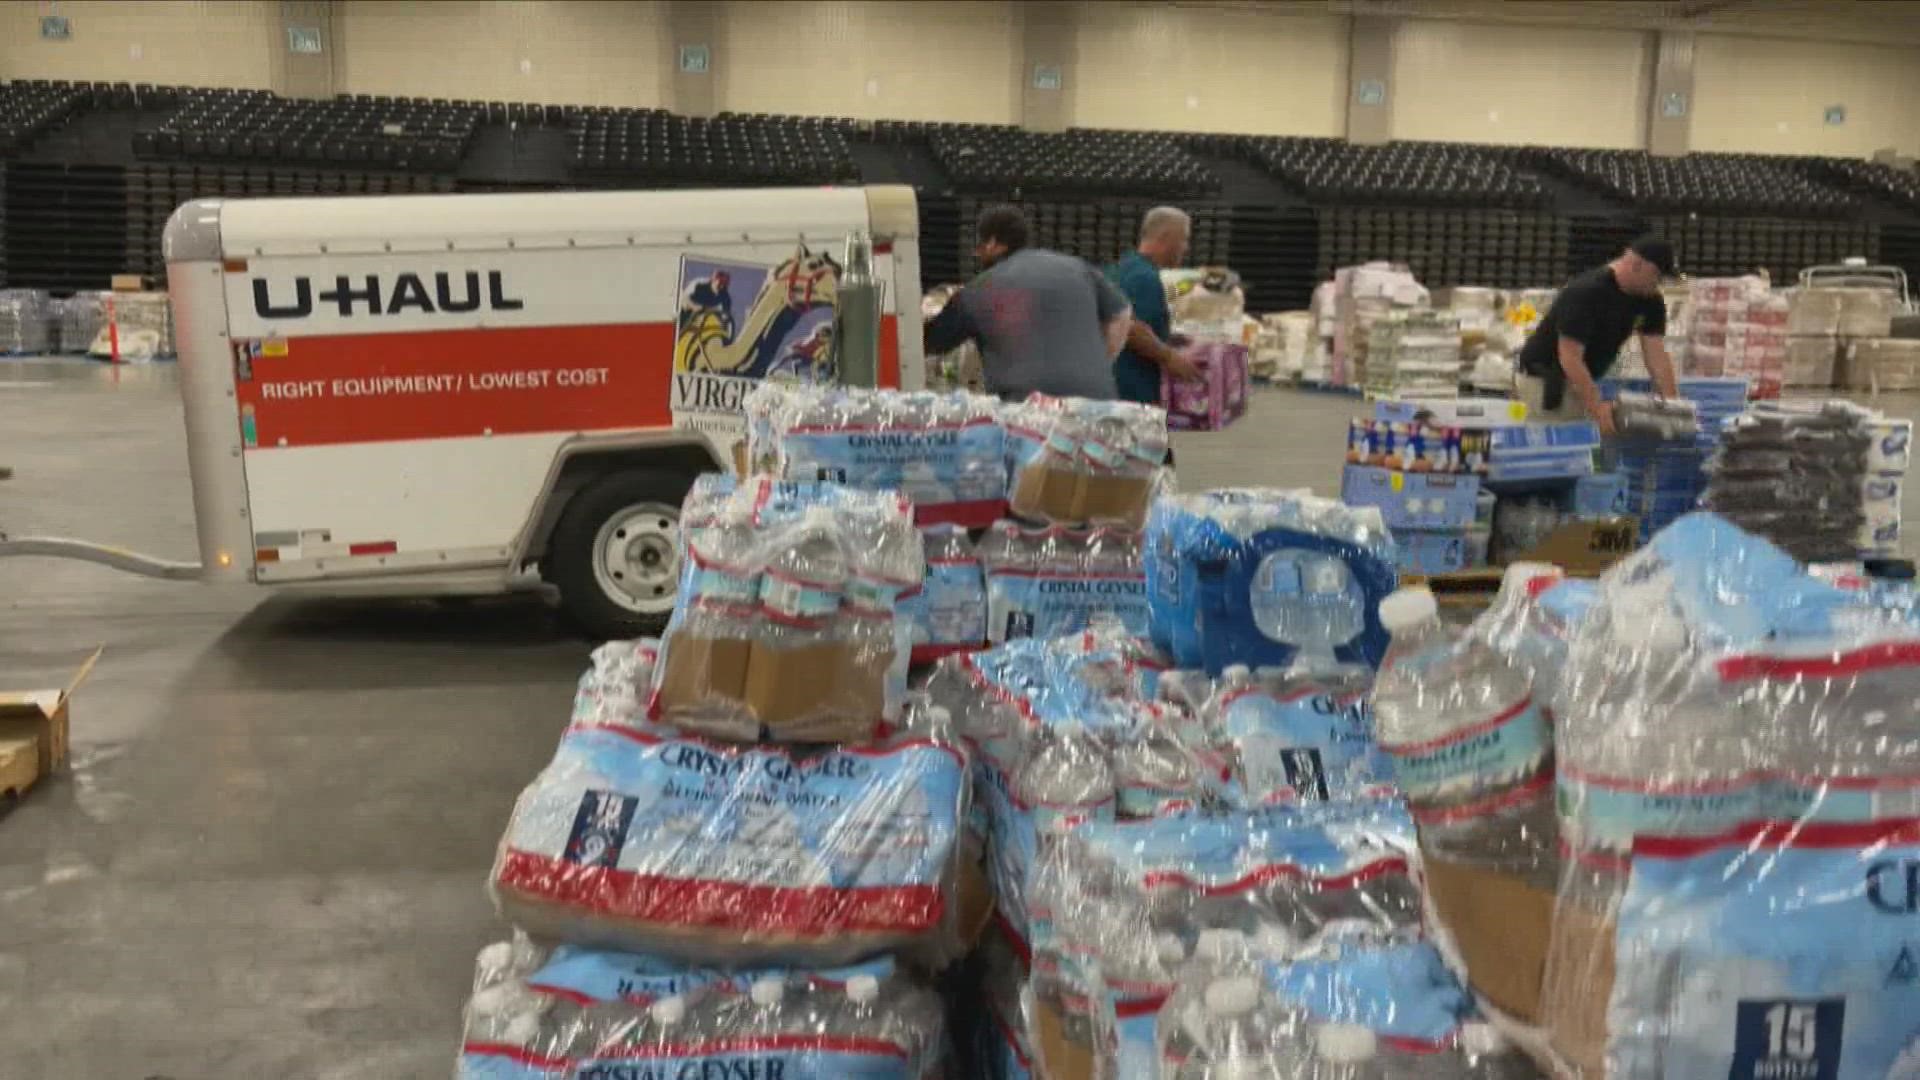 People are helping each other after Hurricane Ida with much needed supplies.